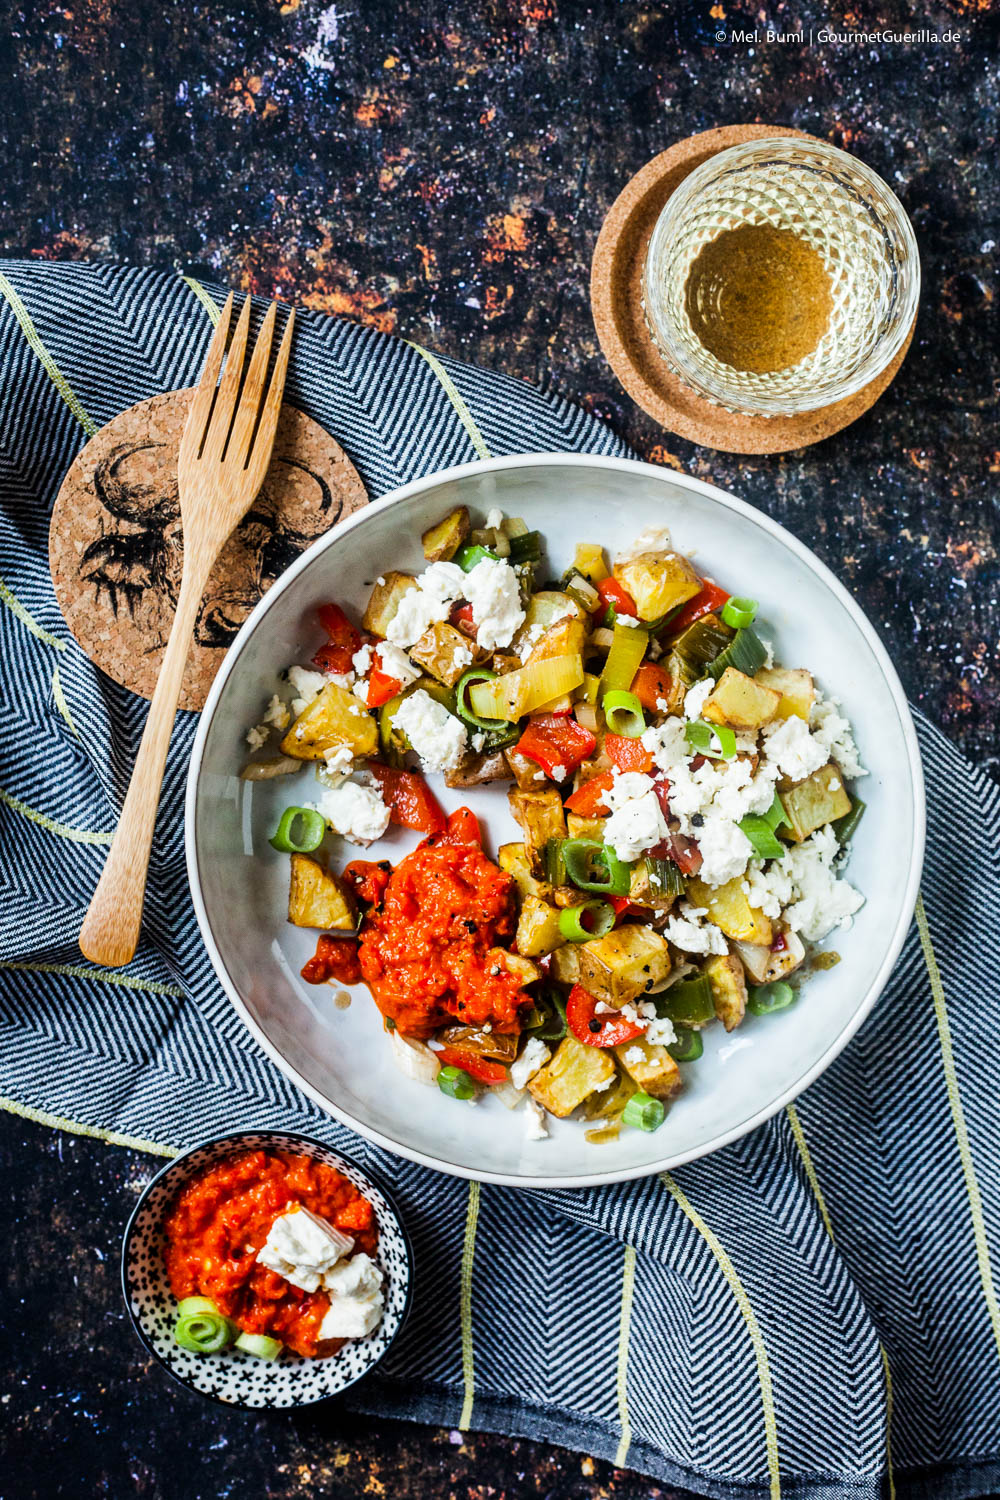 Baked potato salad with feta and Aiwar - fix from the Airfryer | GourmetGuerilla.de